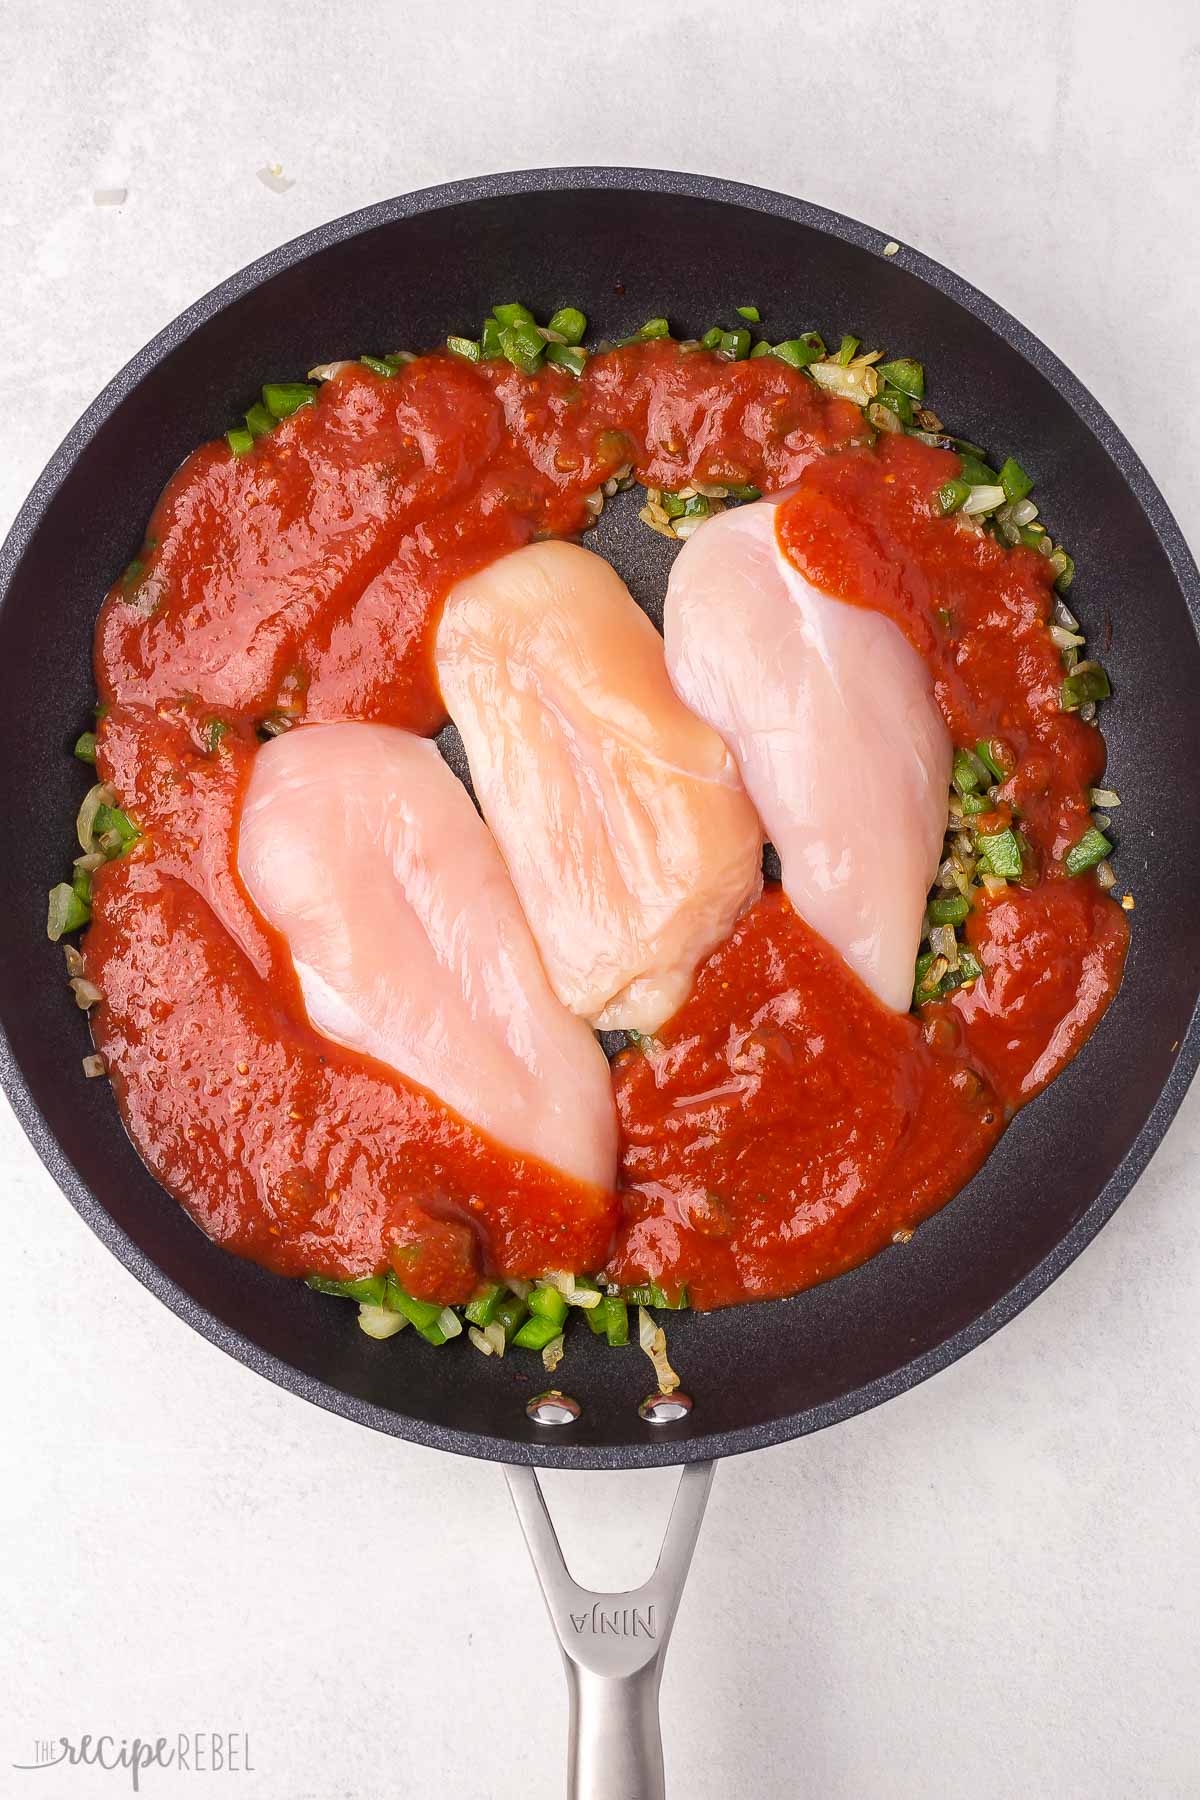 three chicken breasts and sauce lying in a black frying pan.